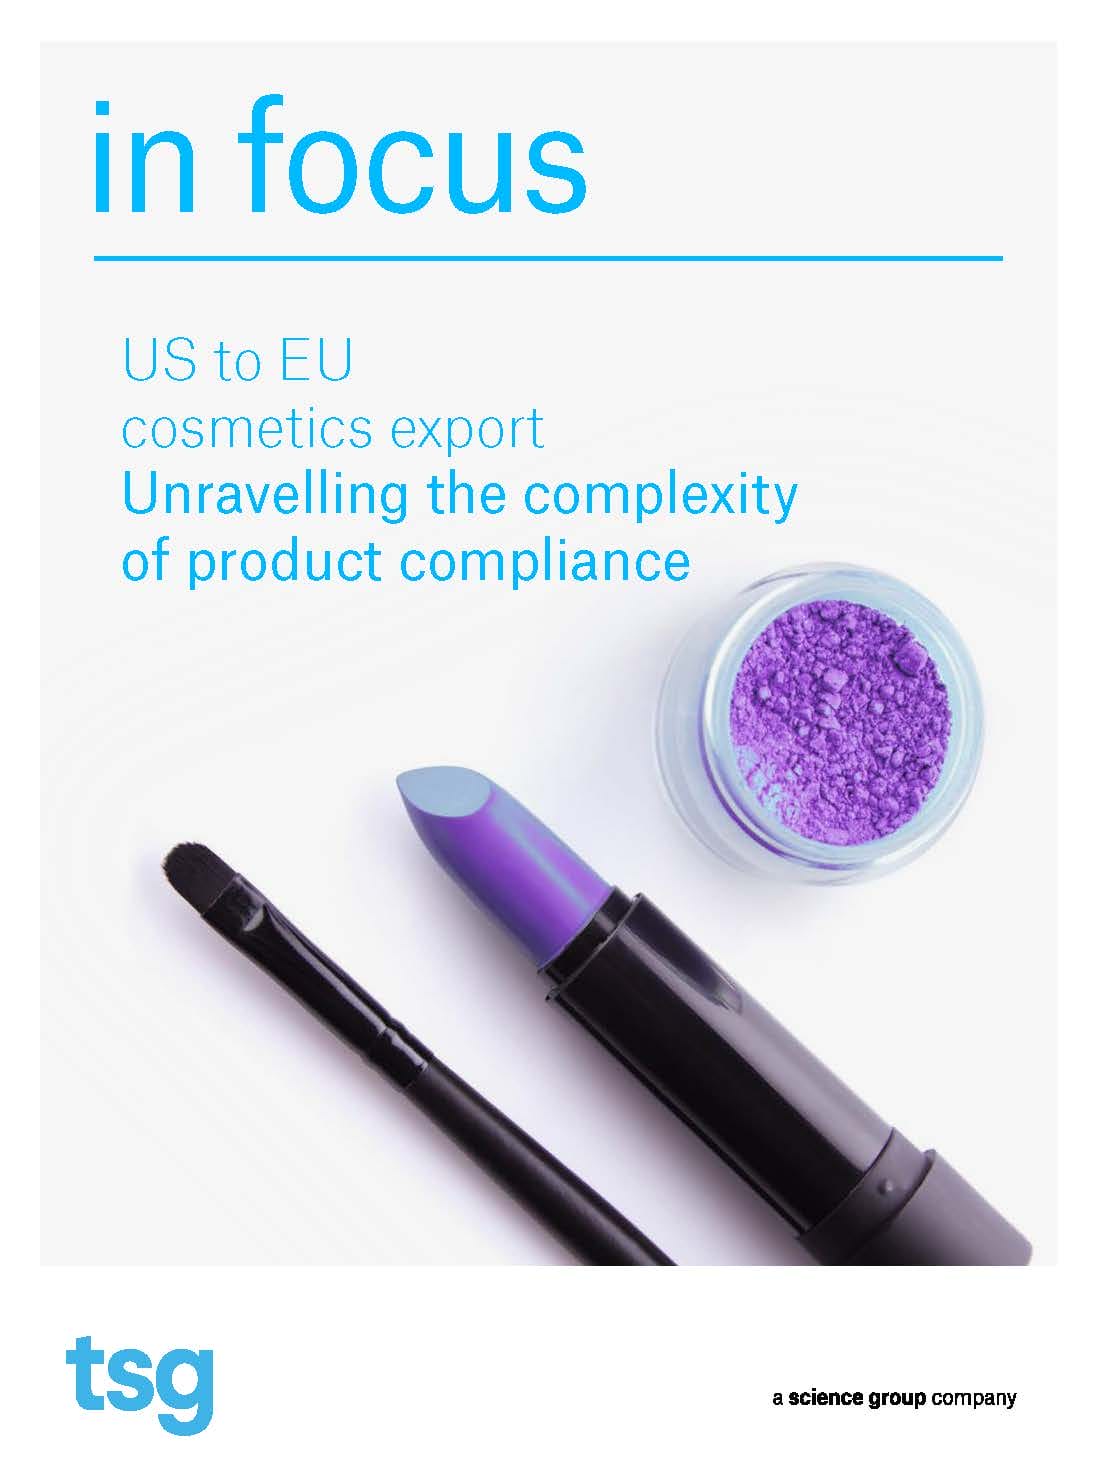 US to EU cosmetics export - unravelling the complexity of product compliance image